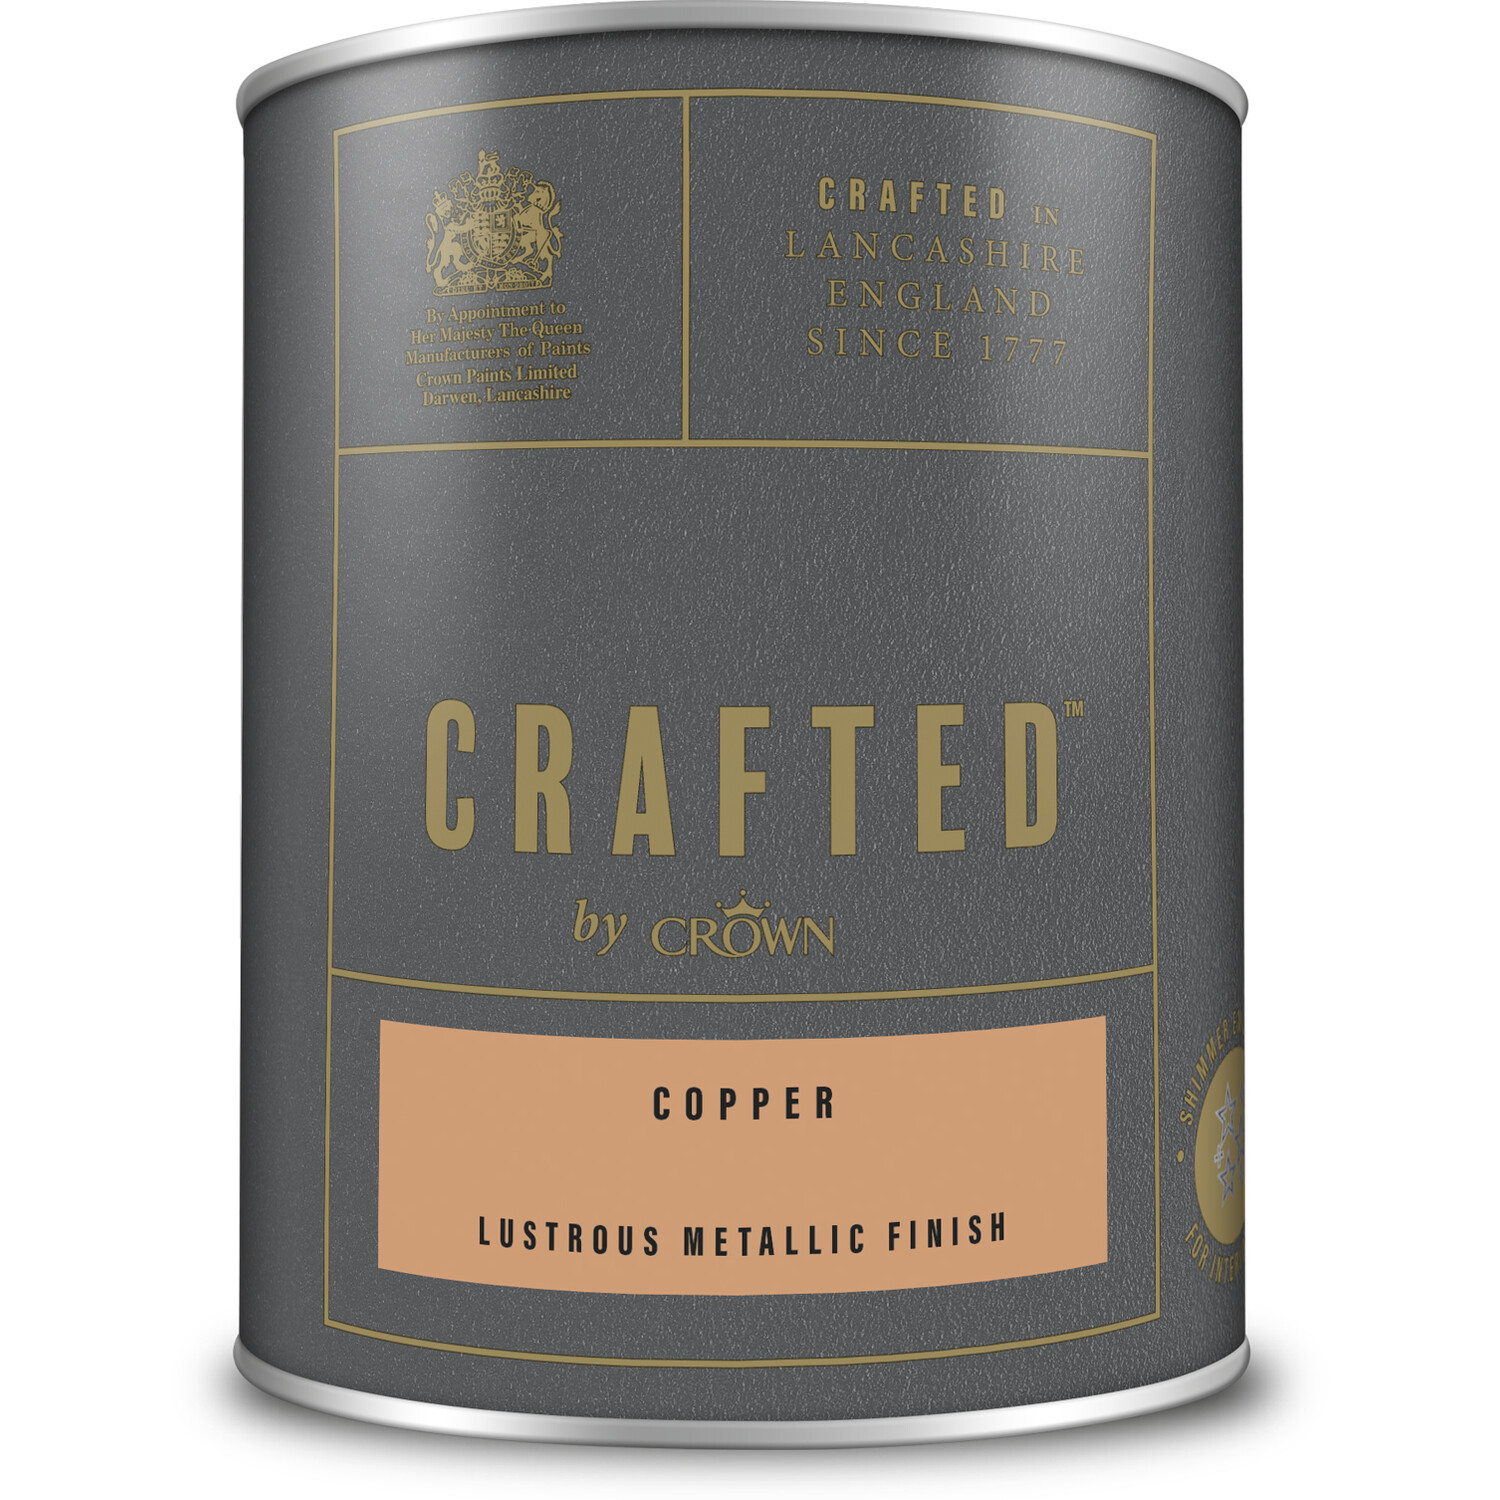 Crown Crafted Walls Wood and Metal Copper Lustrous Metallic Shimmer Emulsion Paint 1.25L Image 2